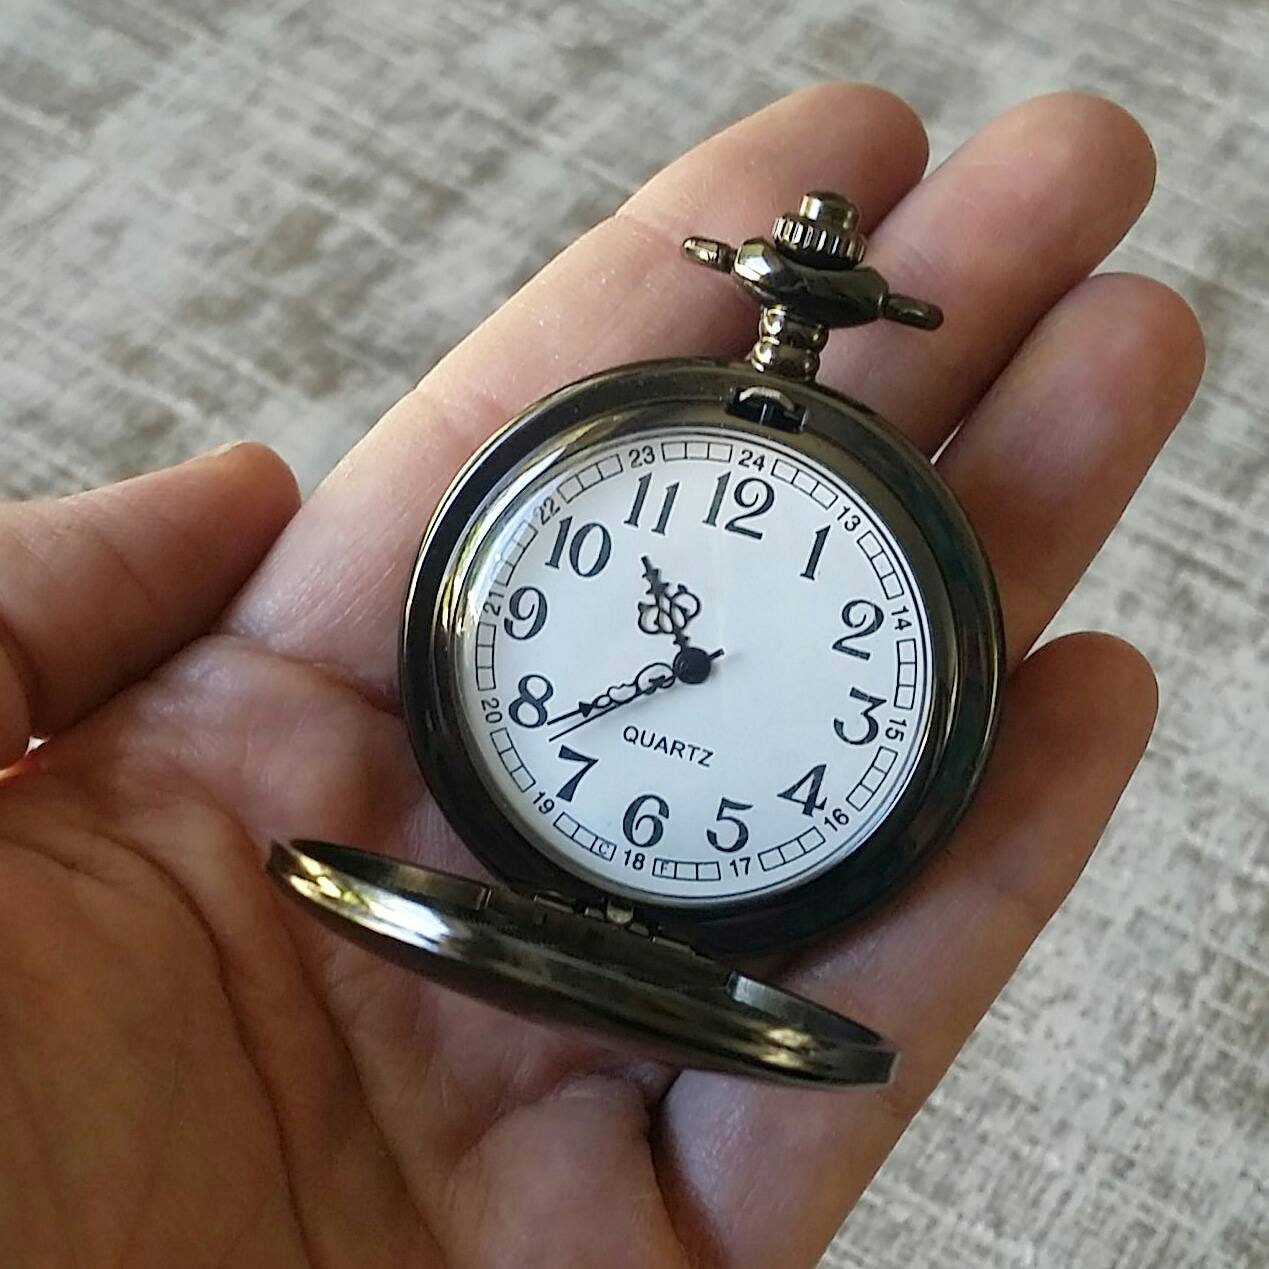 Actual Hand writing engraved on a pocket watch